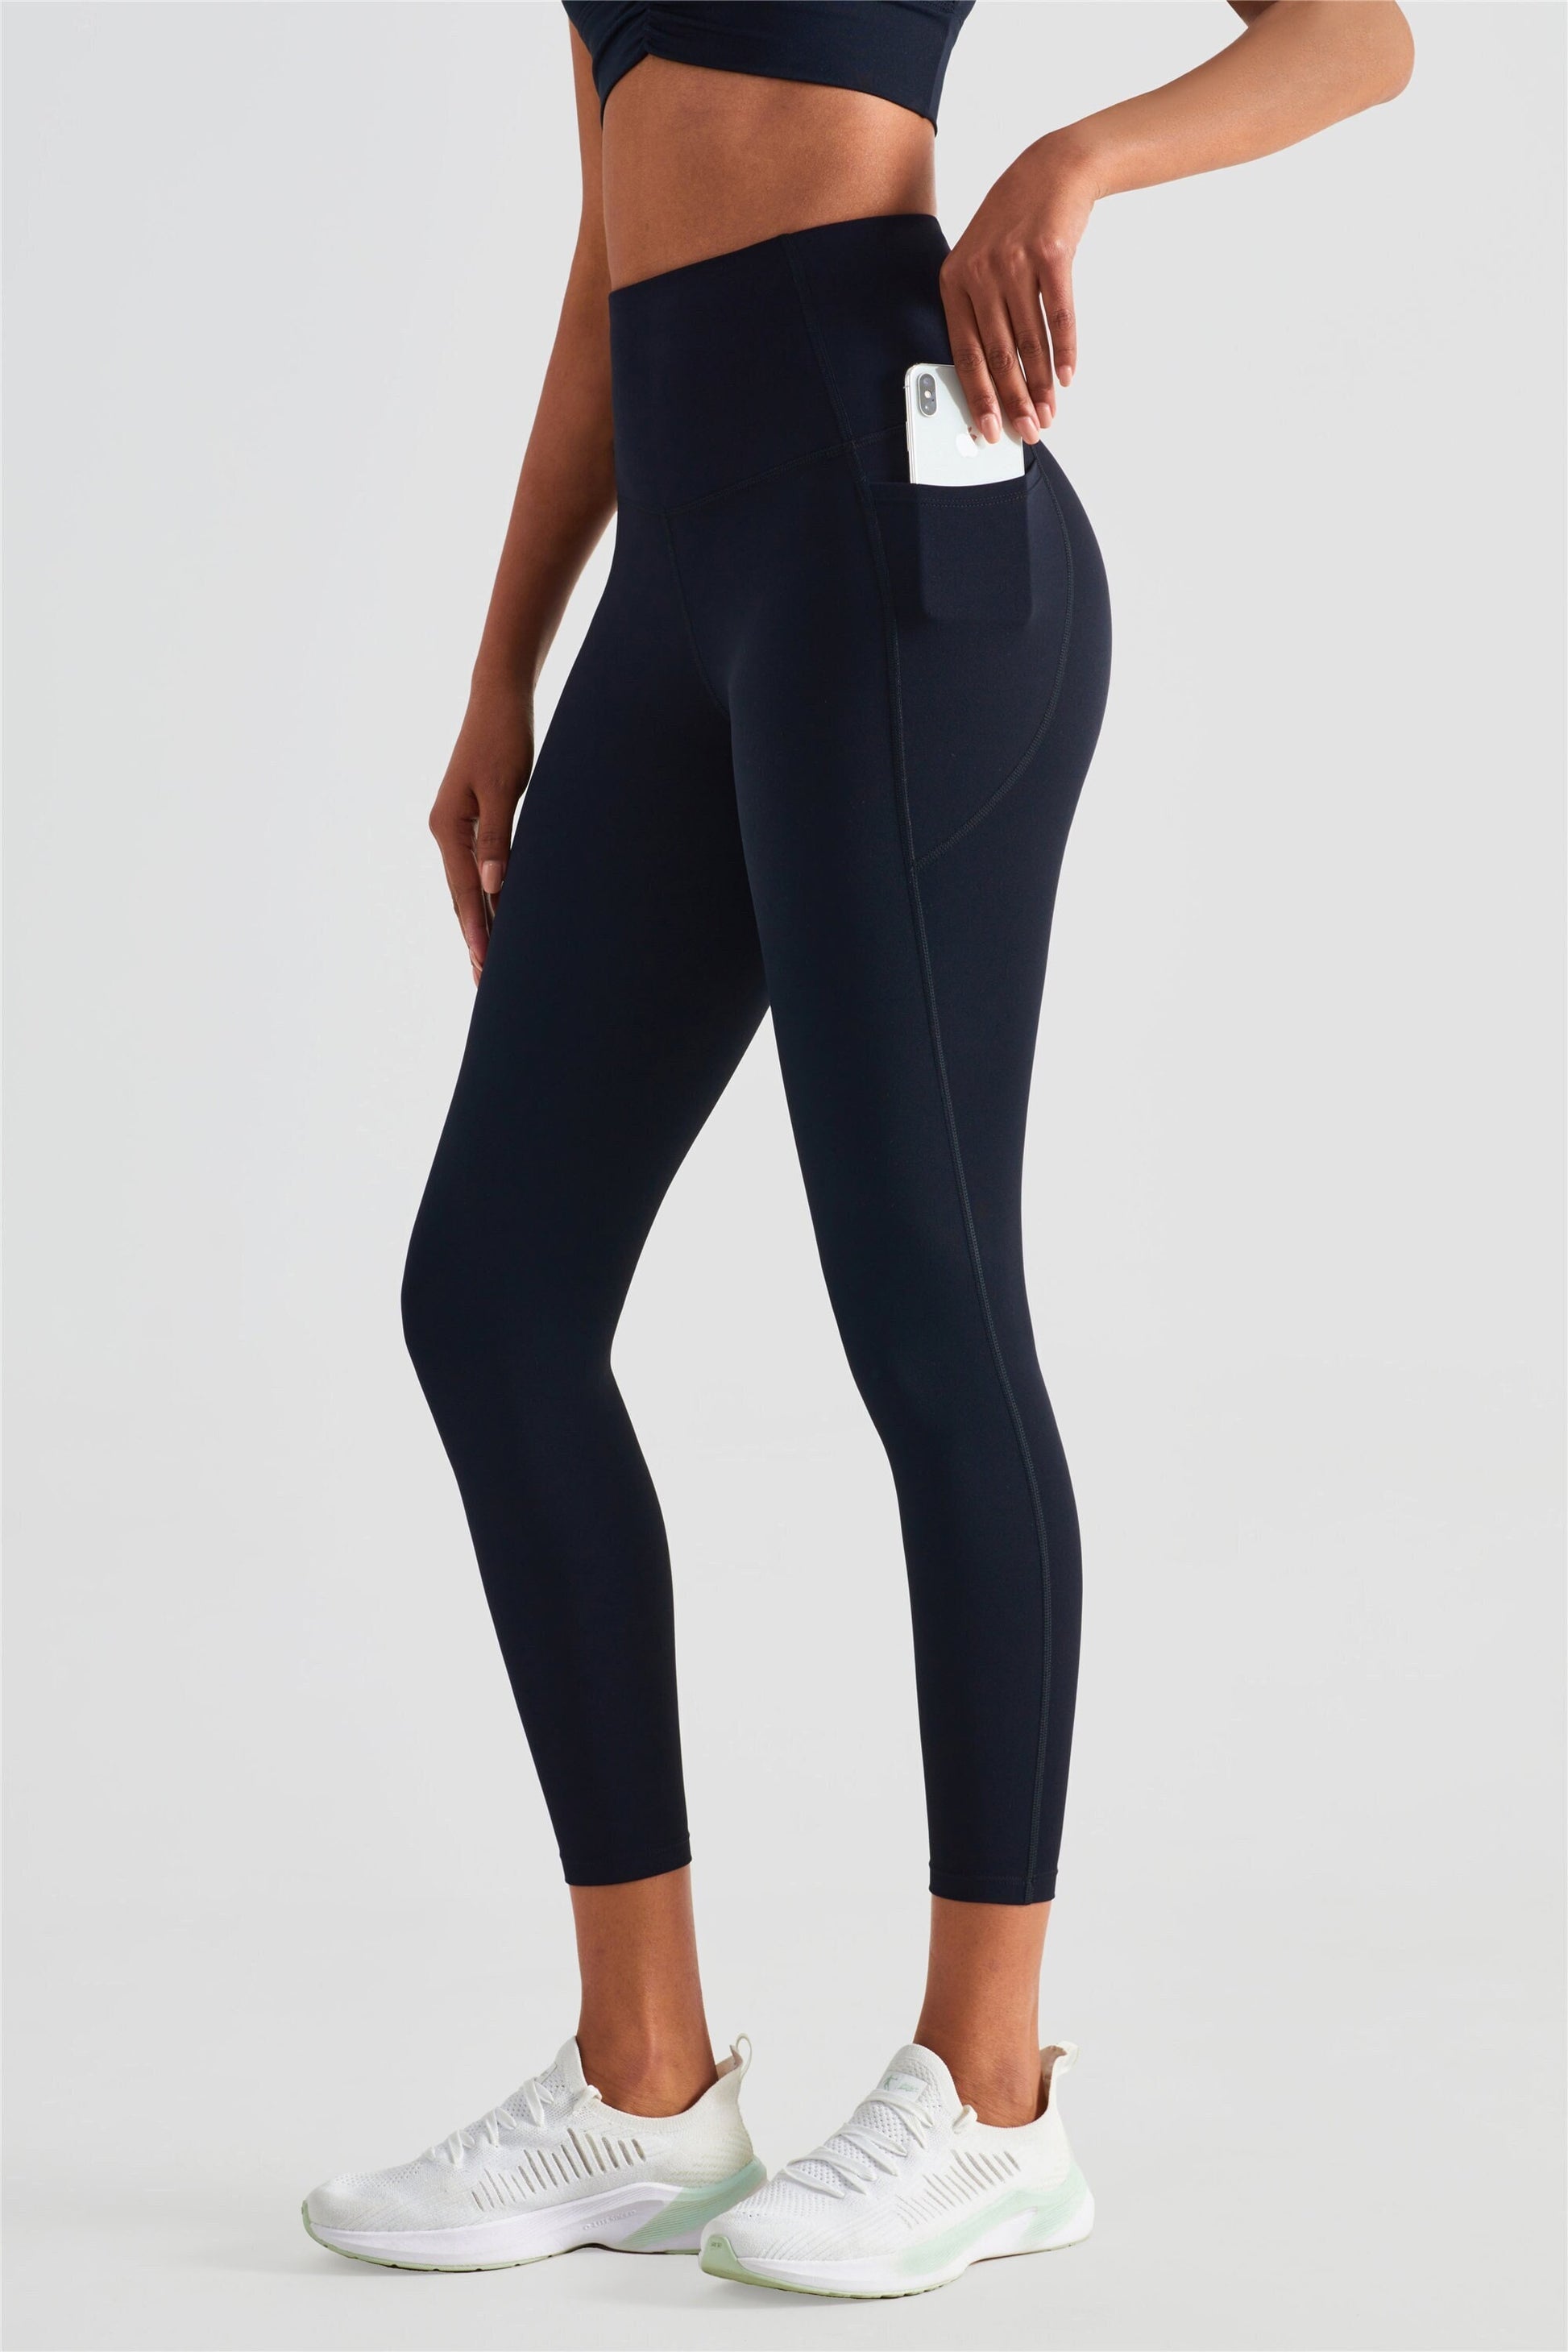 High Waisted Nylon Leggings For Women Perfect For Sport, Yoga, And Everyday  Wear Sexy, Tight, Elastic, With Pockets Mujers Yoga Pants No Panties From  Mtled8, $6.74